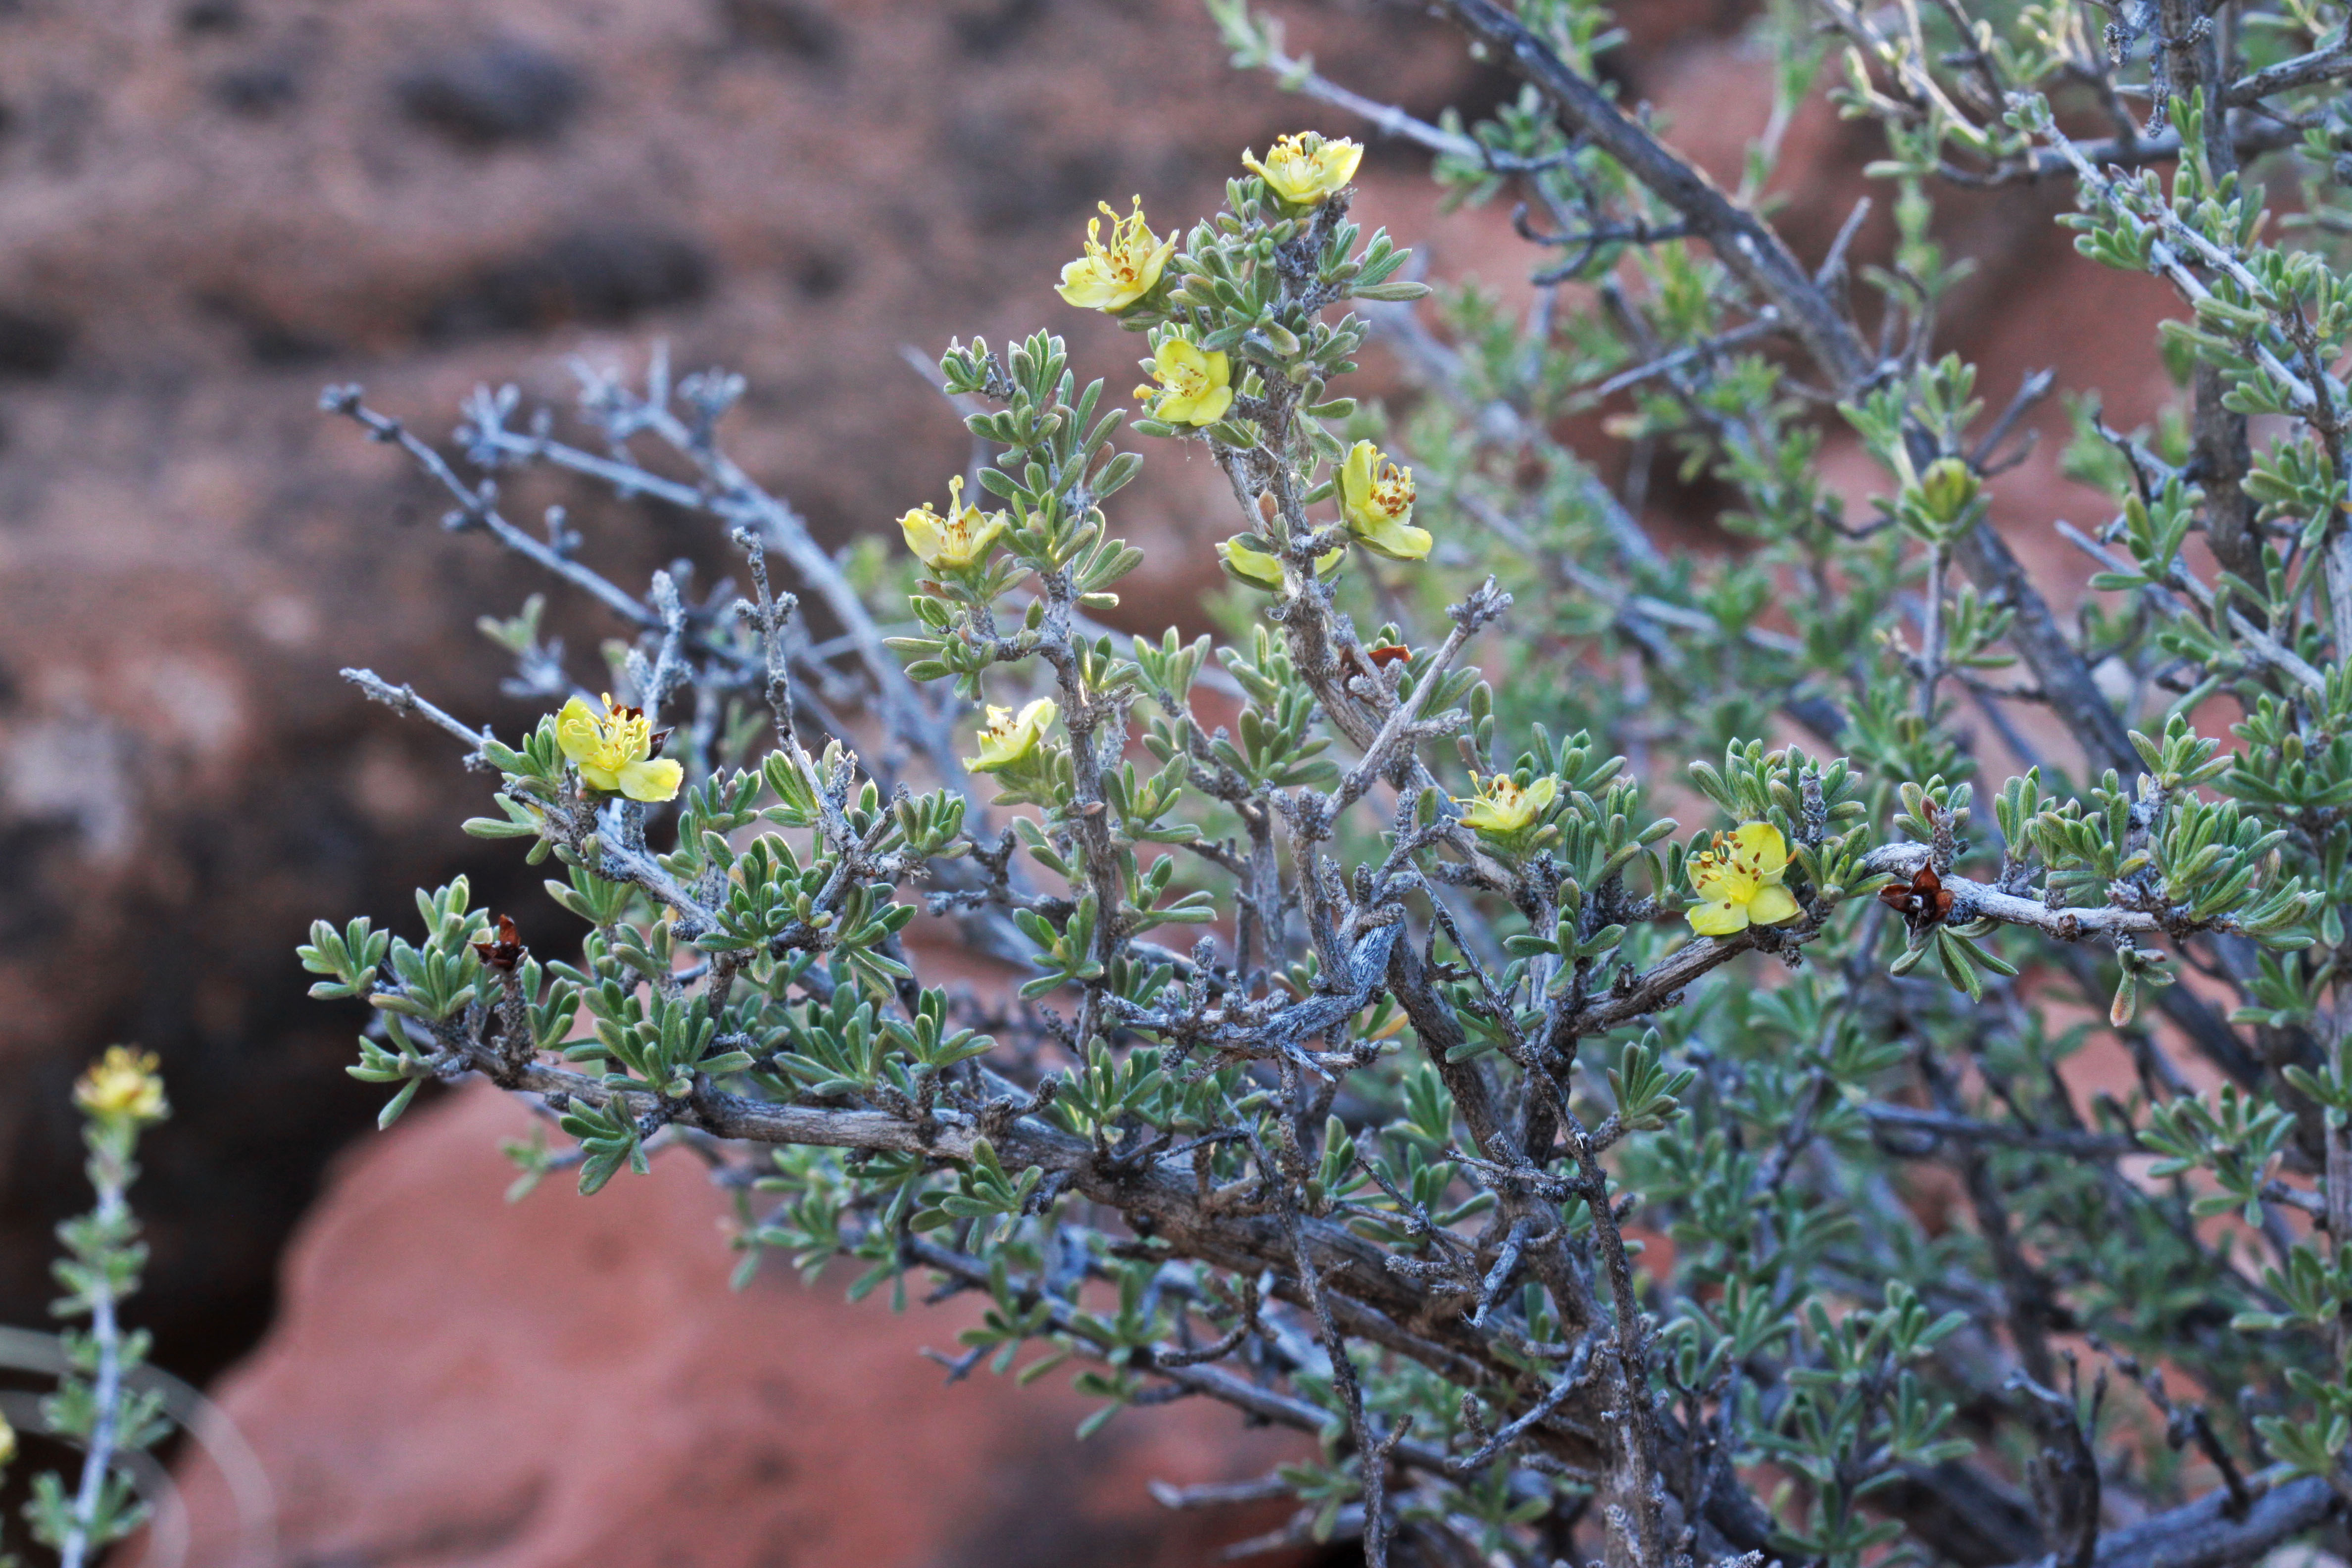 Yellow flowers and woody stems with foliage